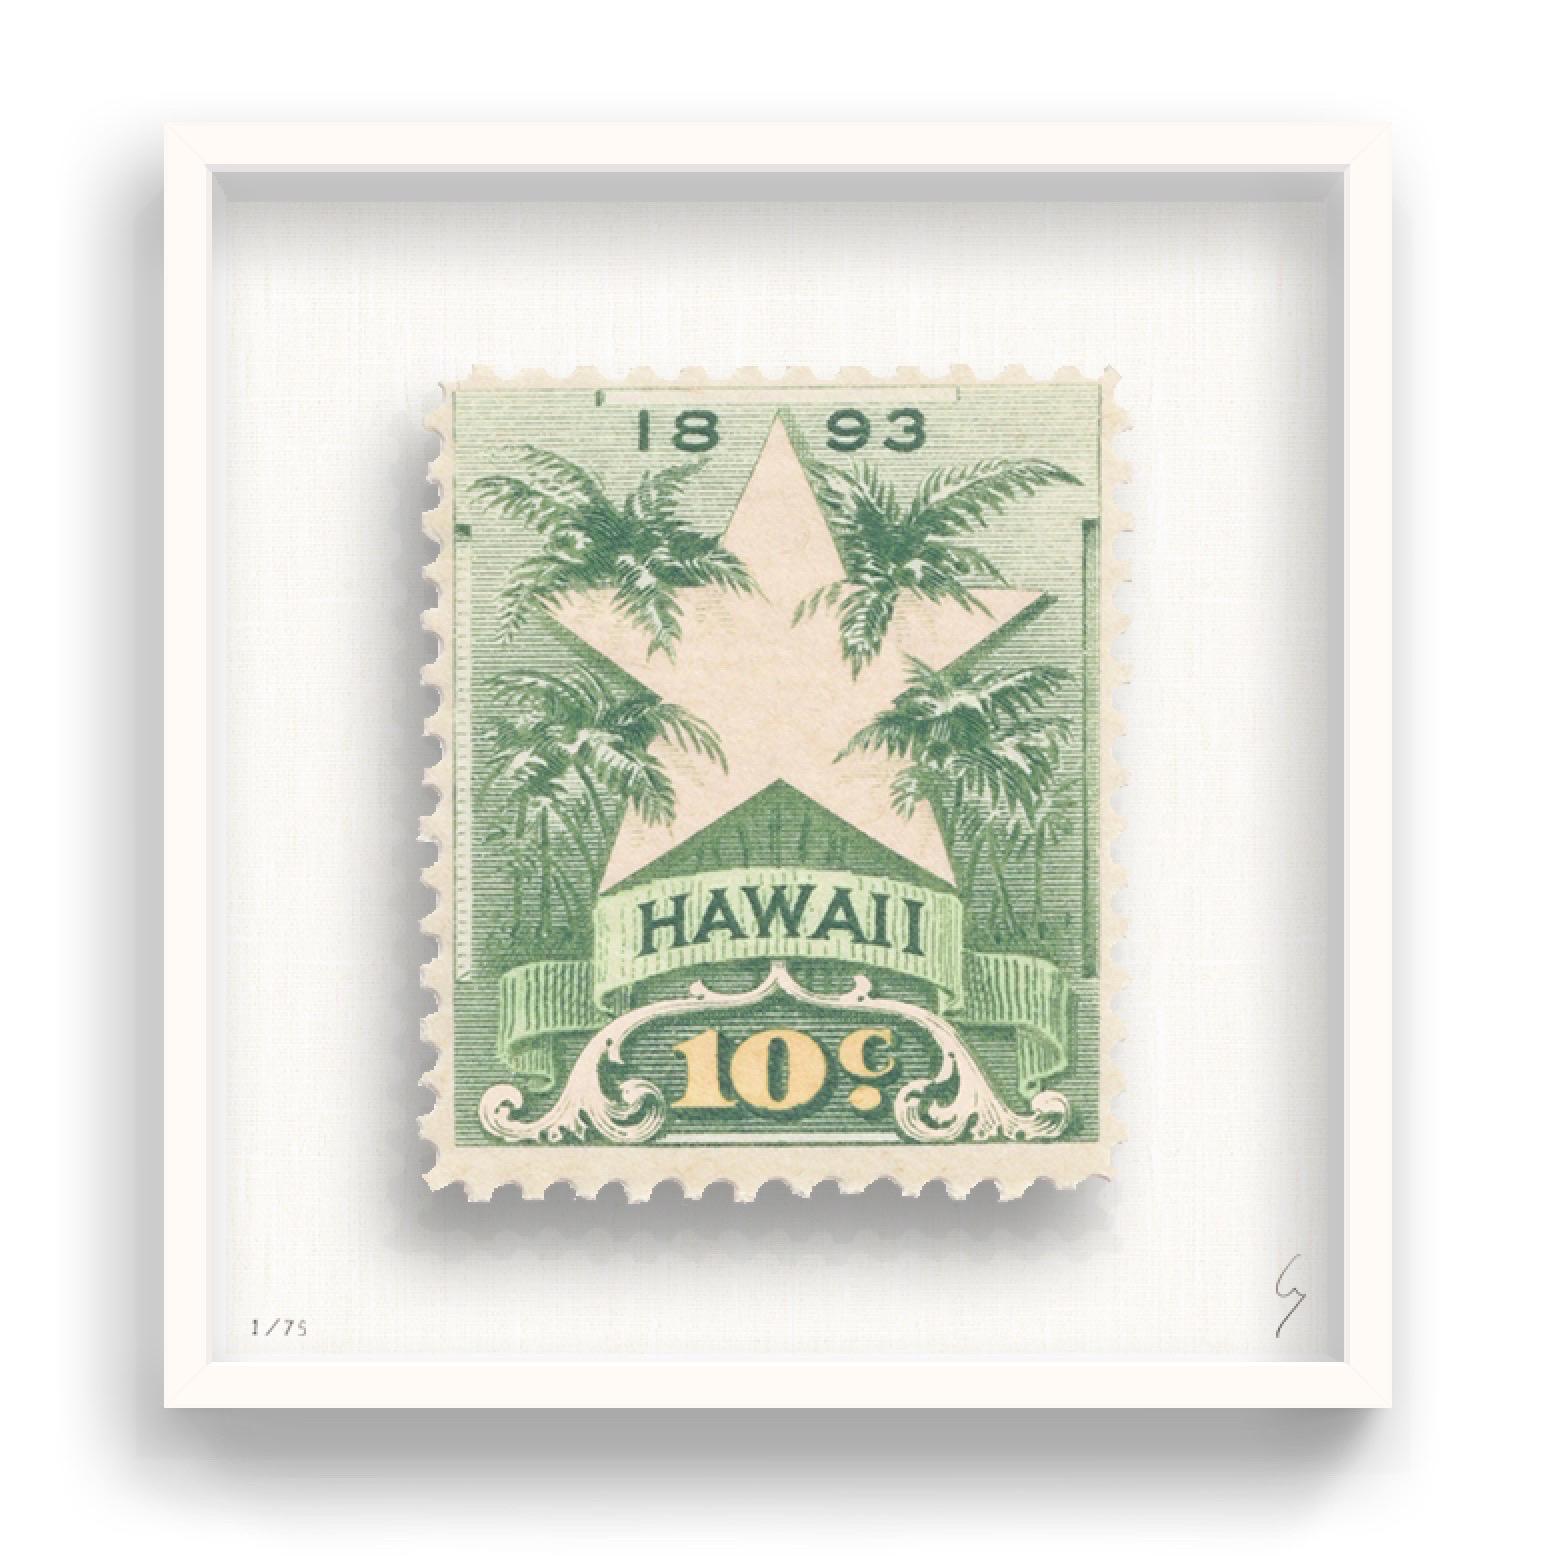 Guy Gee, Hawaii (medium)

Hand-engraved print on 350gsm on G.F Smith card
53 x 56cm (20 4/5 x 22 2/5 in)
Frame included 
Edition of 75 

Each artwork by Guy had been digitally reimagined from an original postage stamp. Cut out and finished by hand,